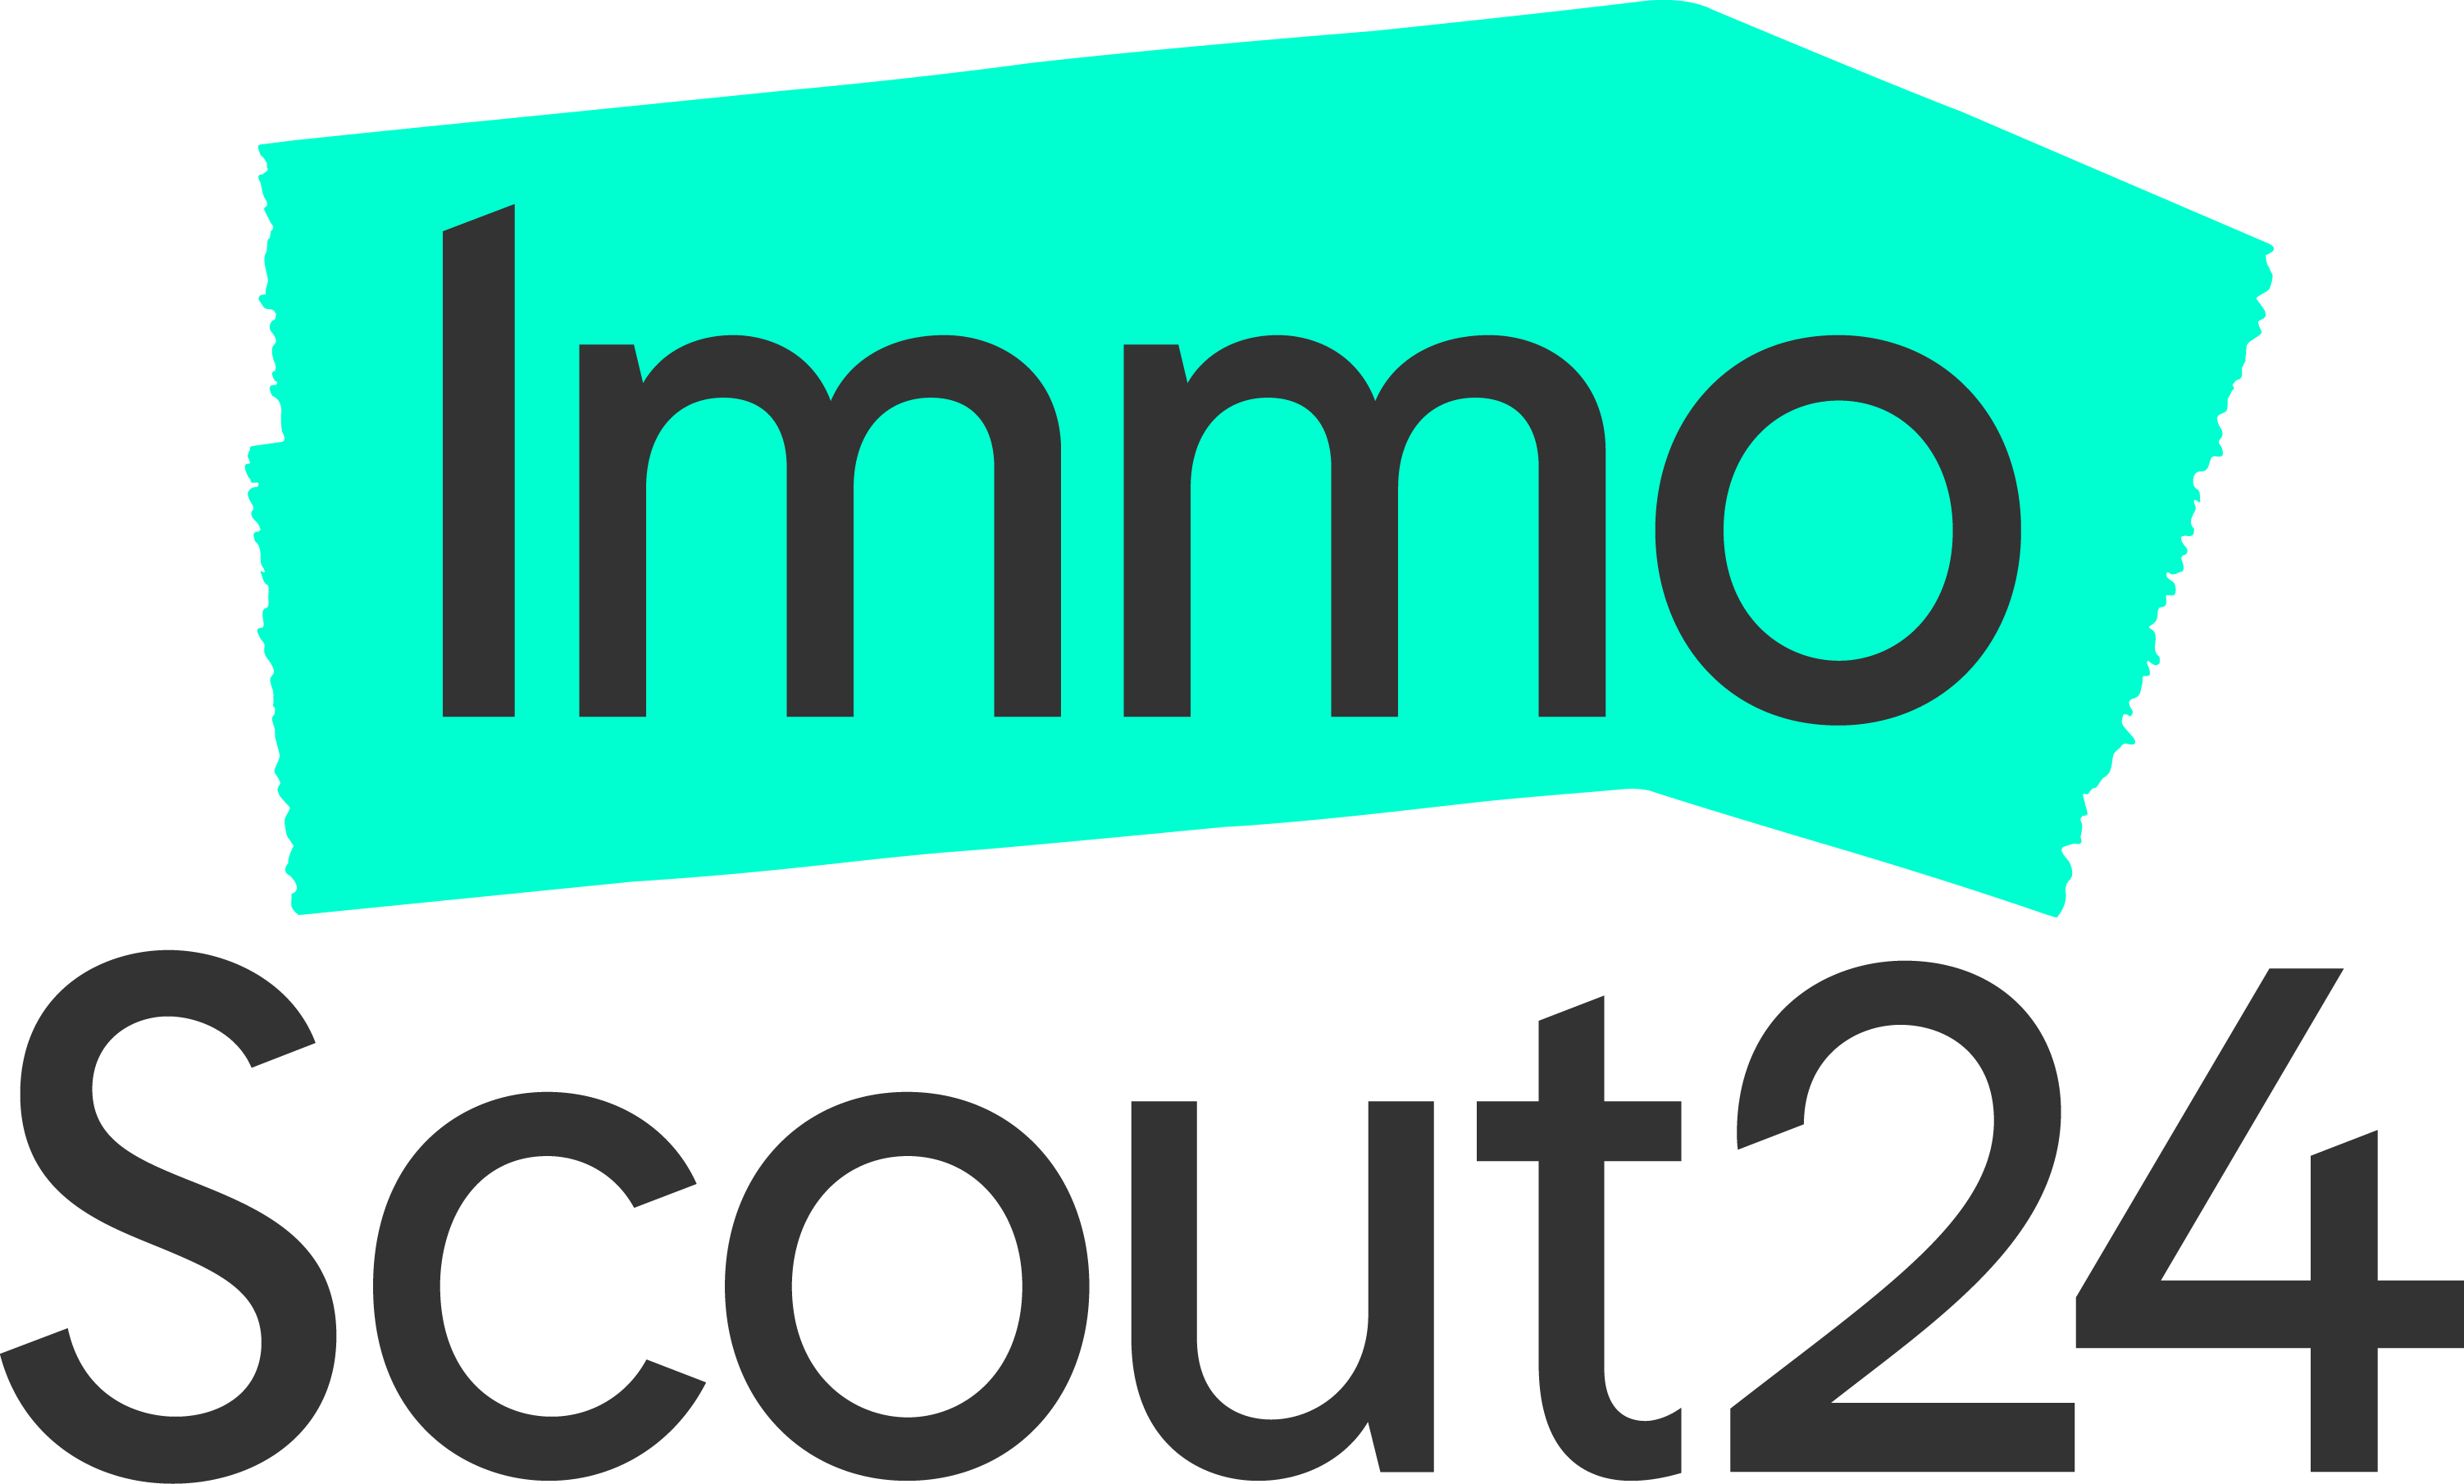 Immoscout 24 Logo